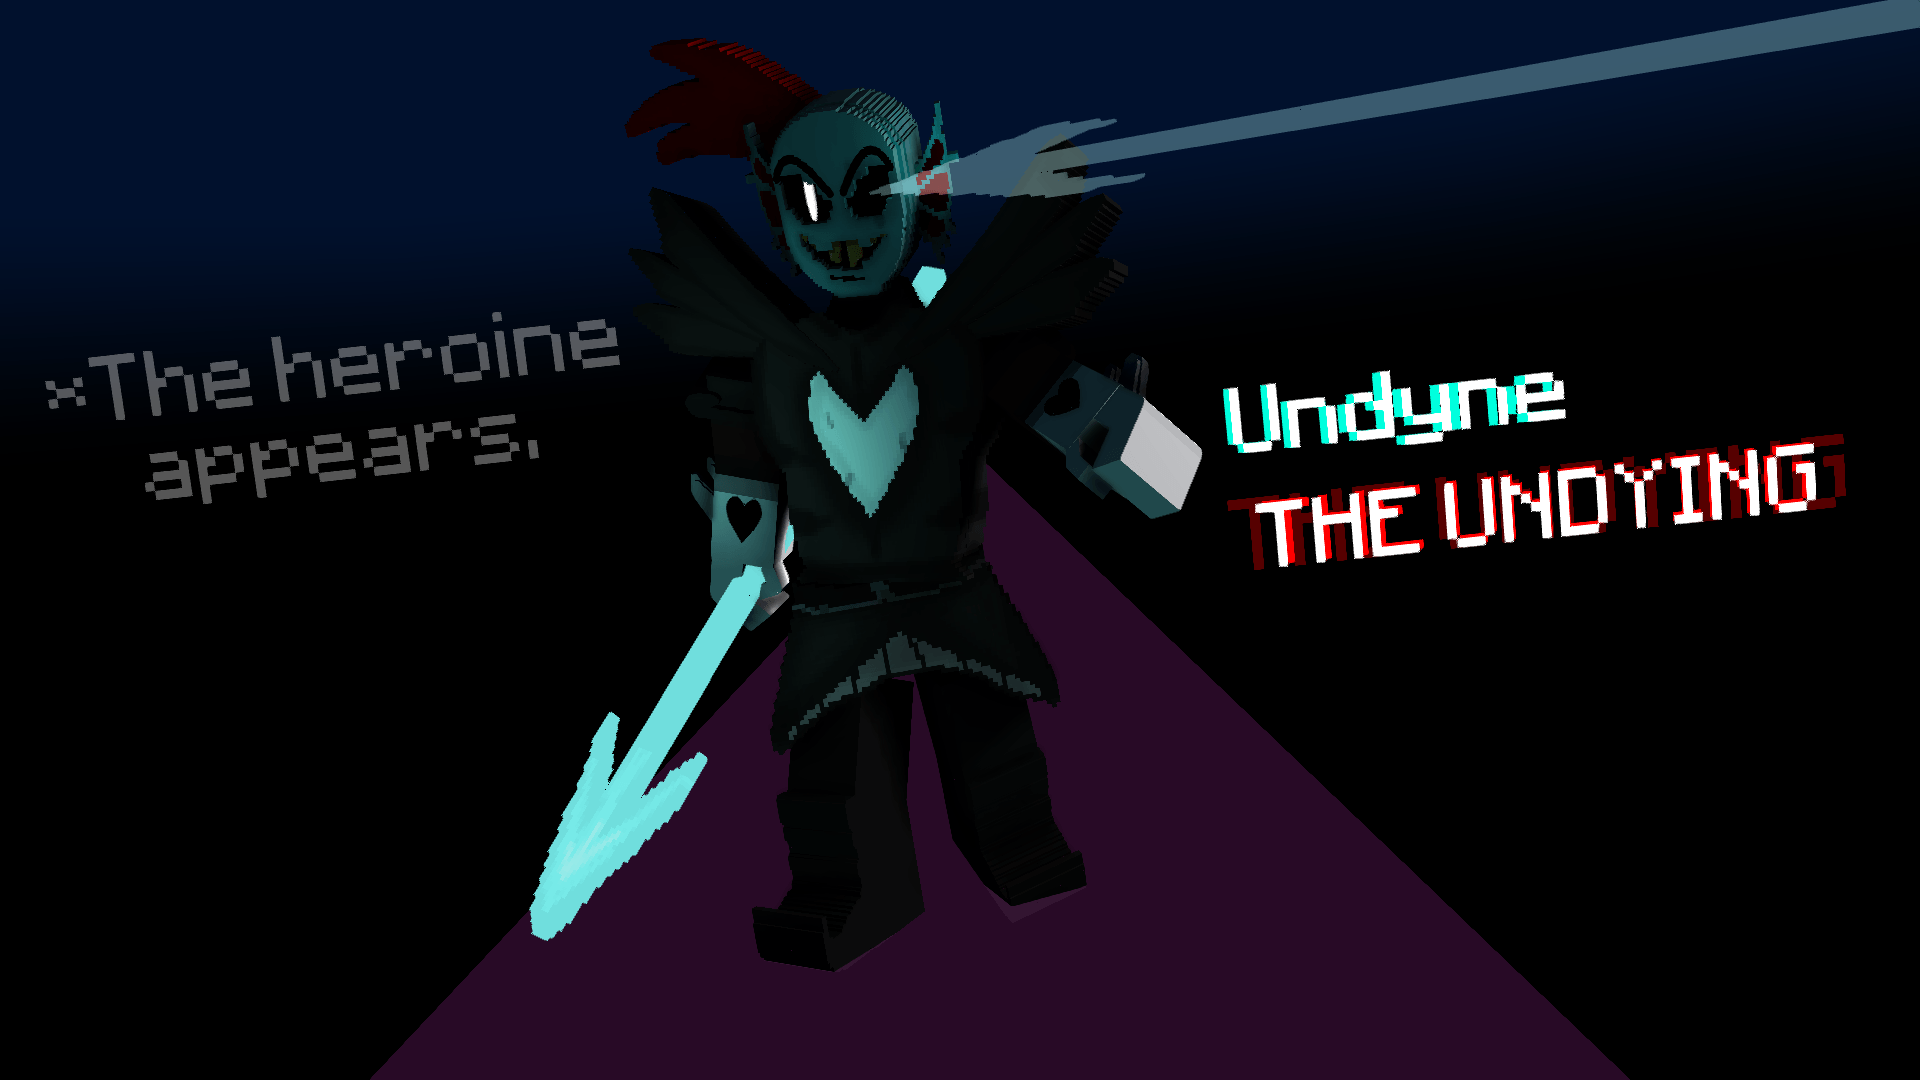 Undyne the Undying (Undertale) and art